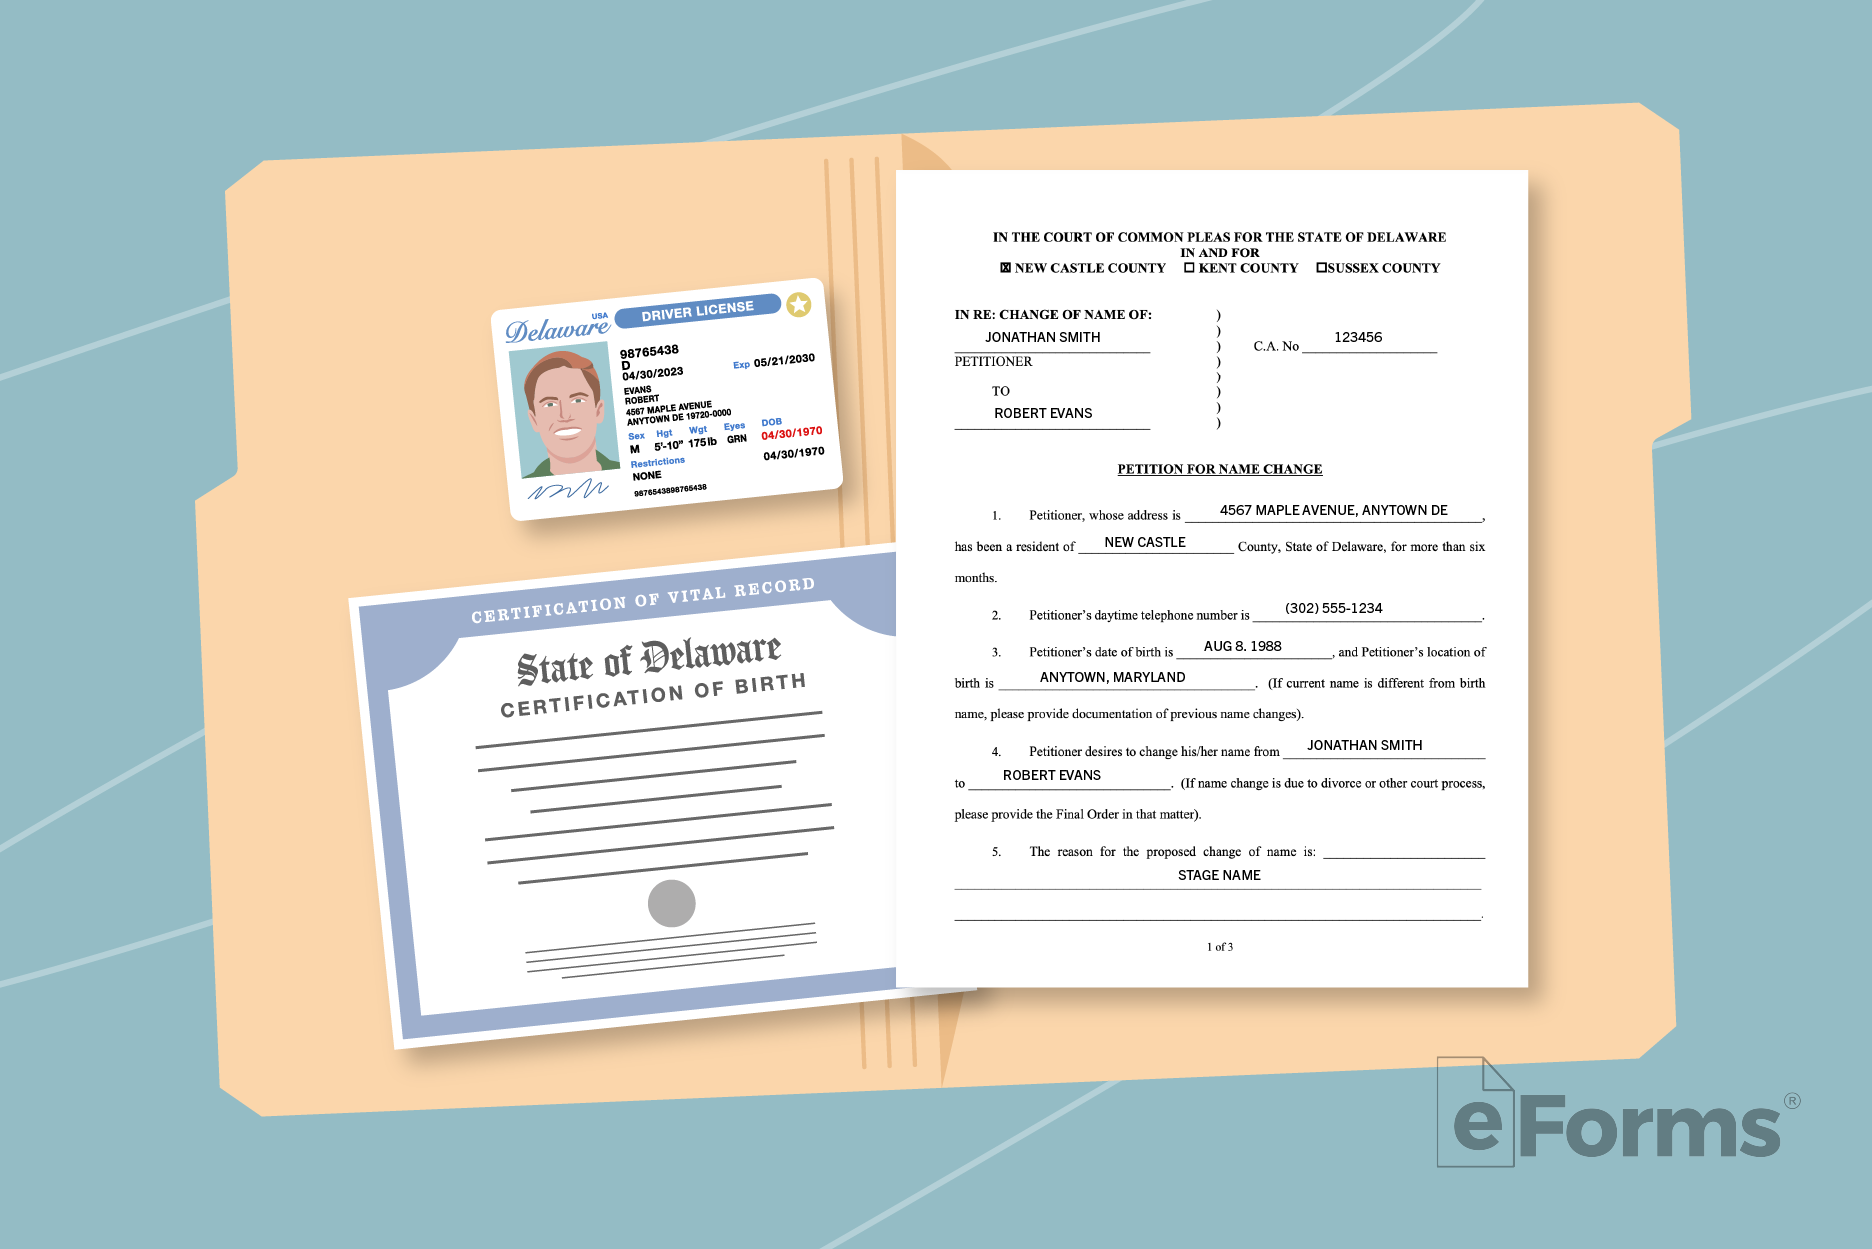 File folder with birth certificate, state ID, and form.